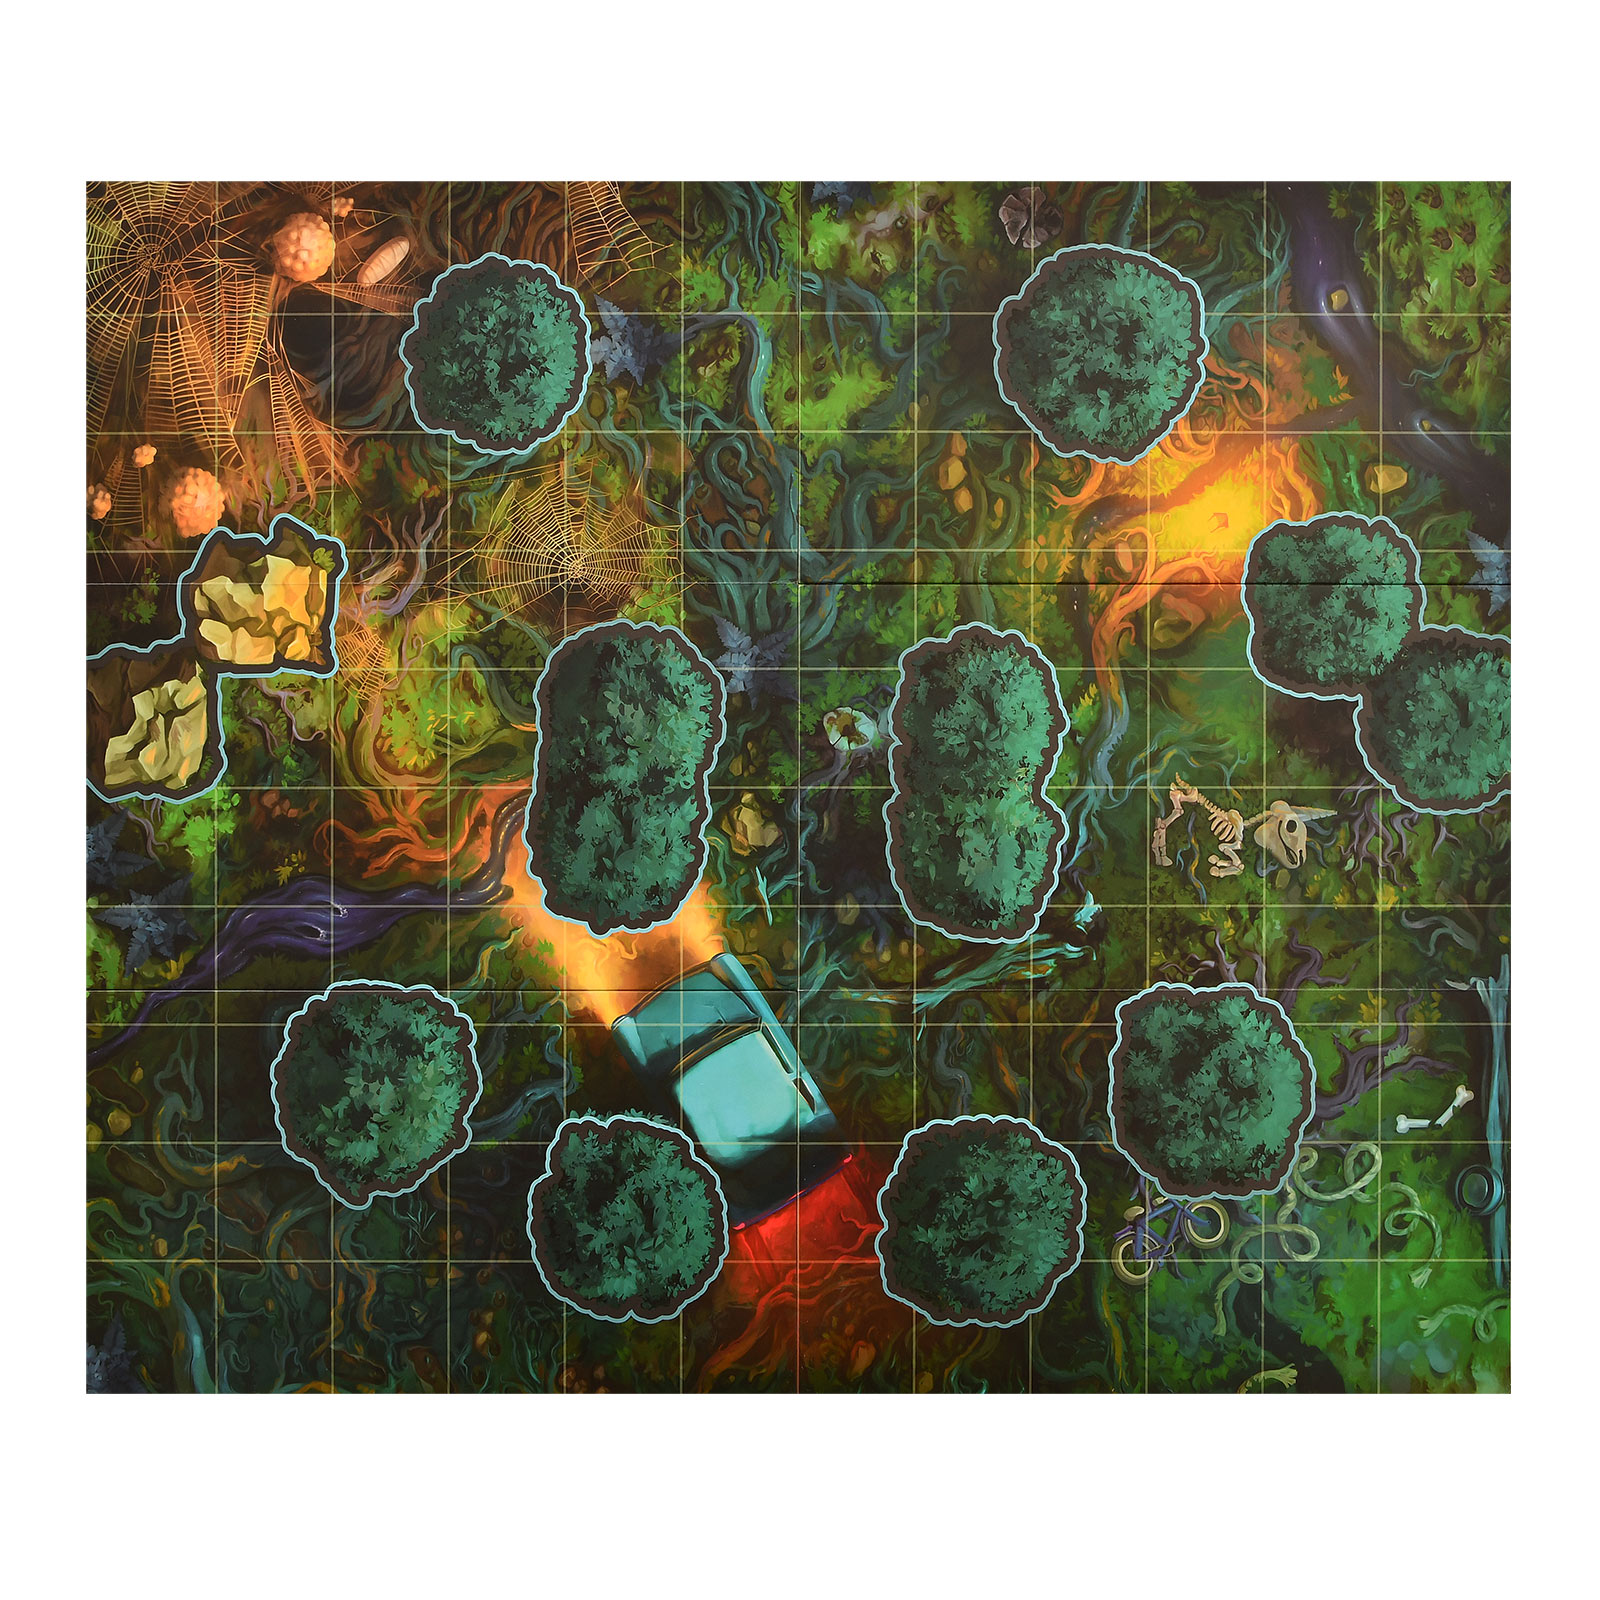 Harry Potter - Draco and Ron Funkoverse Board Game